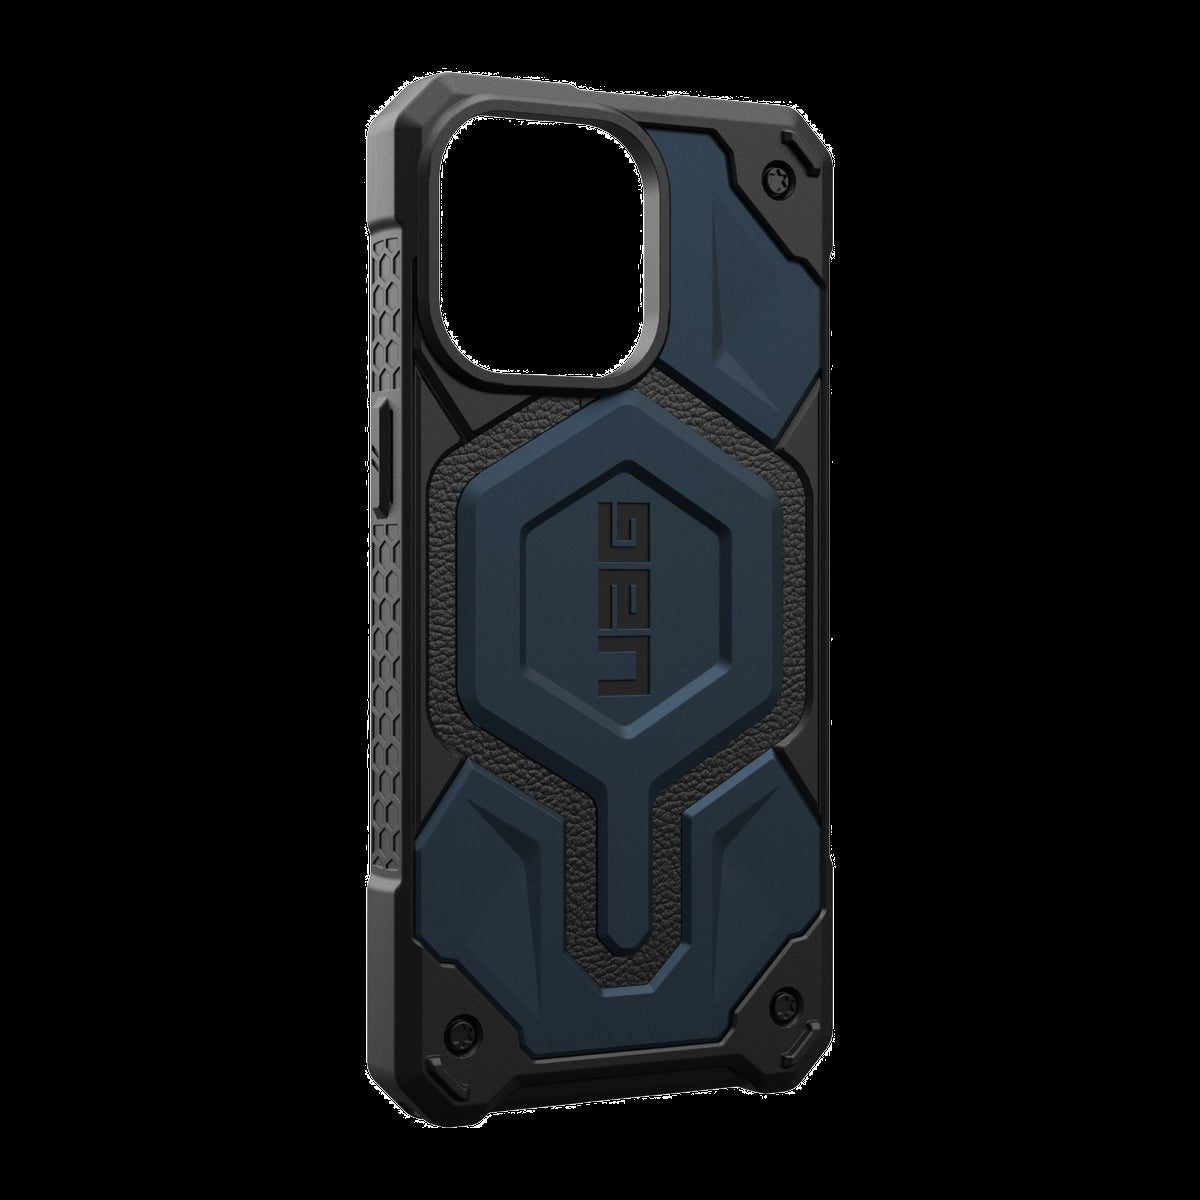 The quintessential, all-terrain, rugged protective case now available with built-in MagSafe module. The UAG Monarch Pro is equipped with premium materials for premium protection.